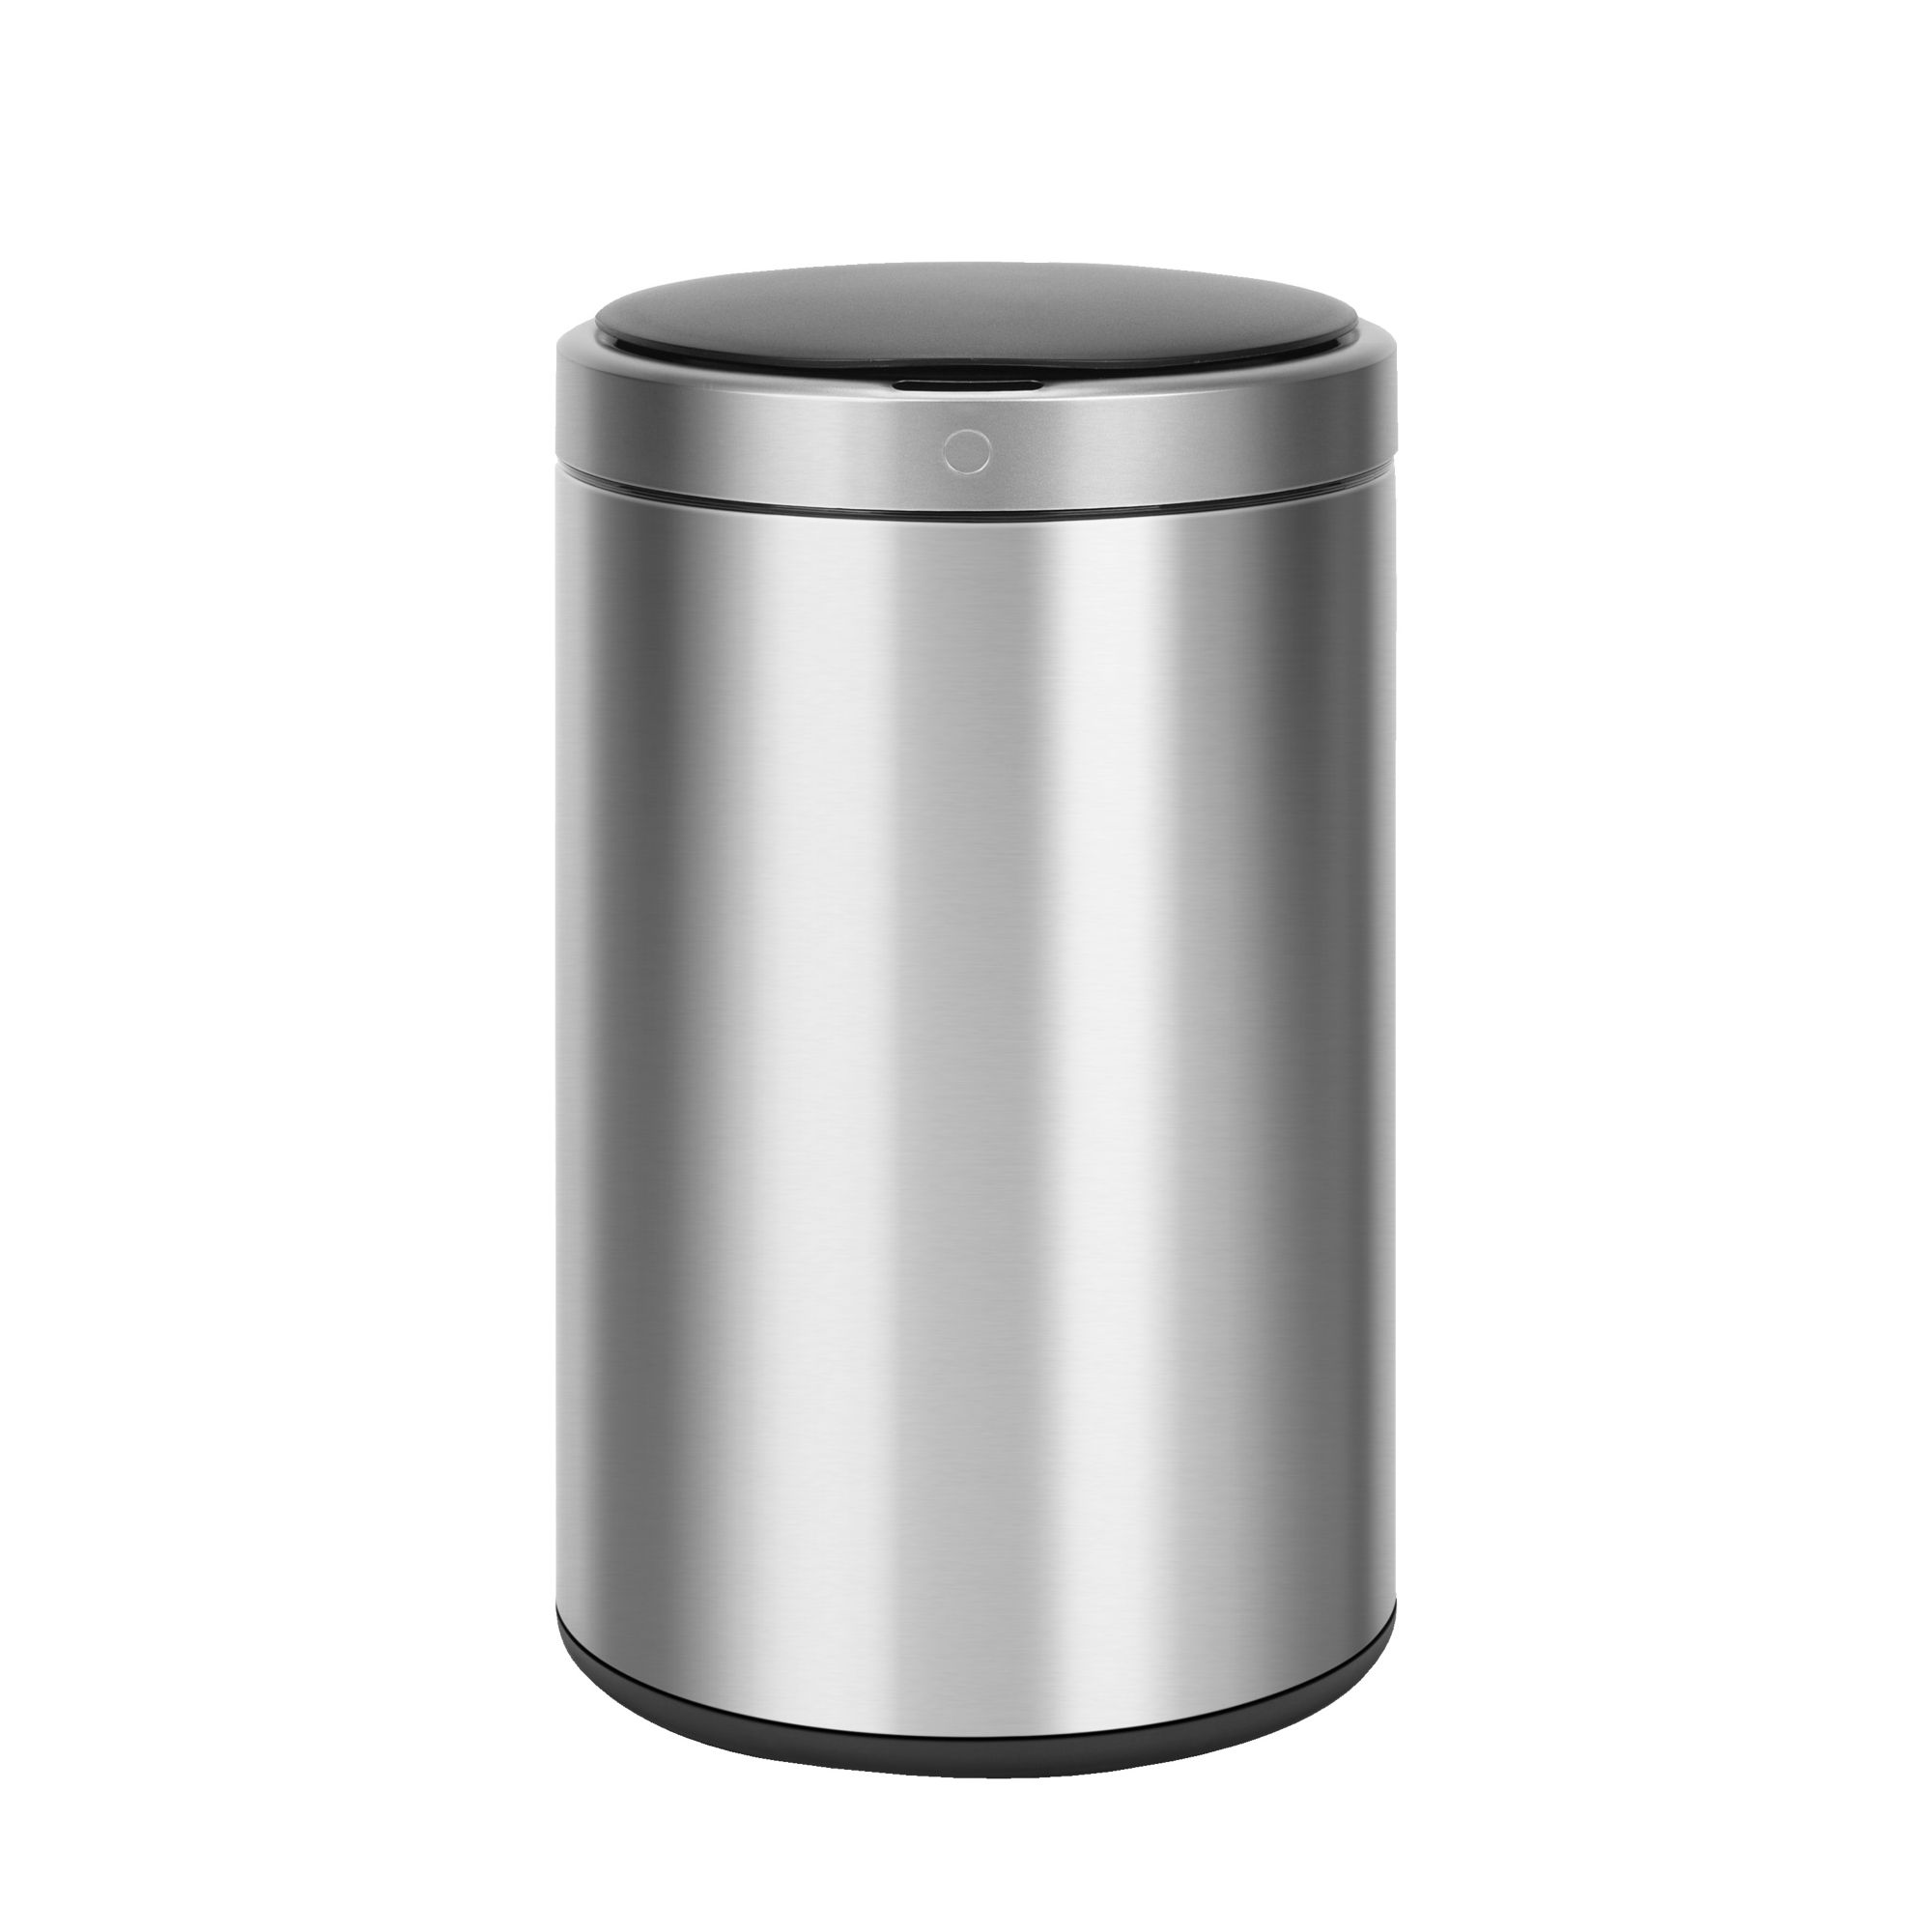 Innovaze 2.6 Gal./10 Liter Slim Stainless Steel Step-On Trash Can for Bathroom and Office - Silver